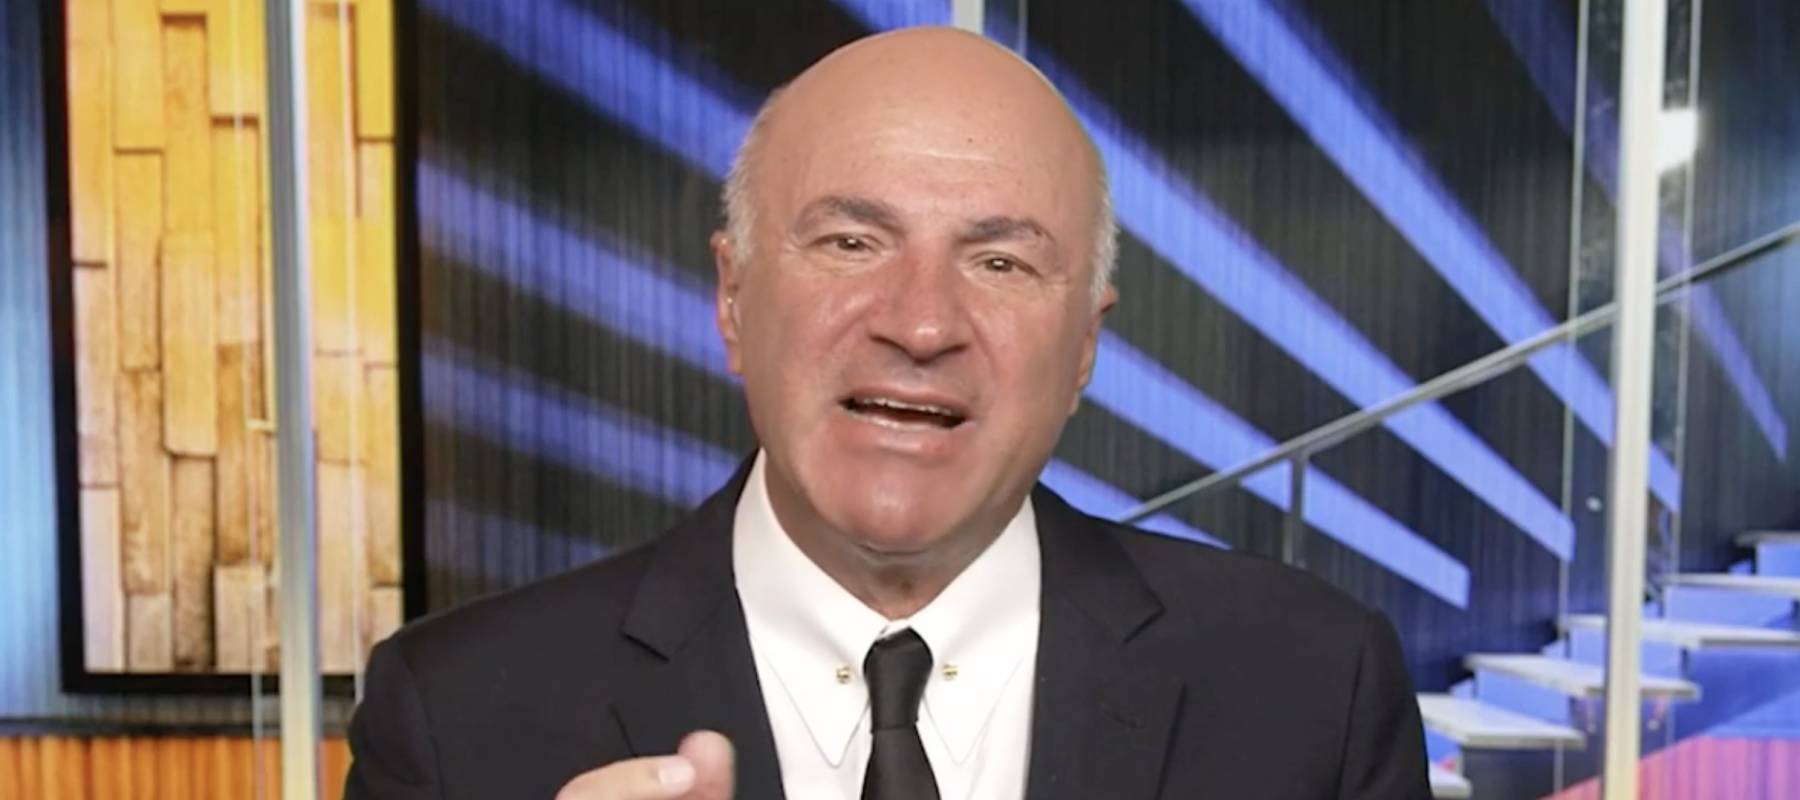 Kevin O&#039;Leary seen on set of Fox News, speaking with seriousness.